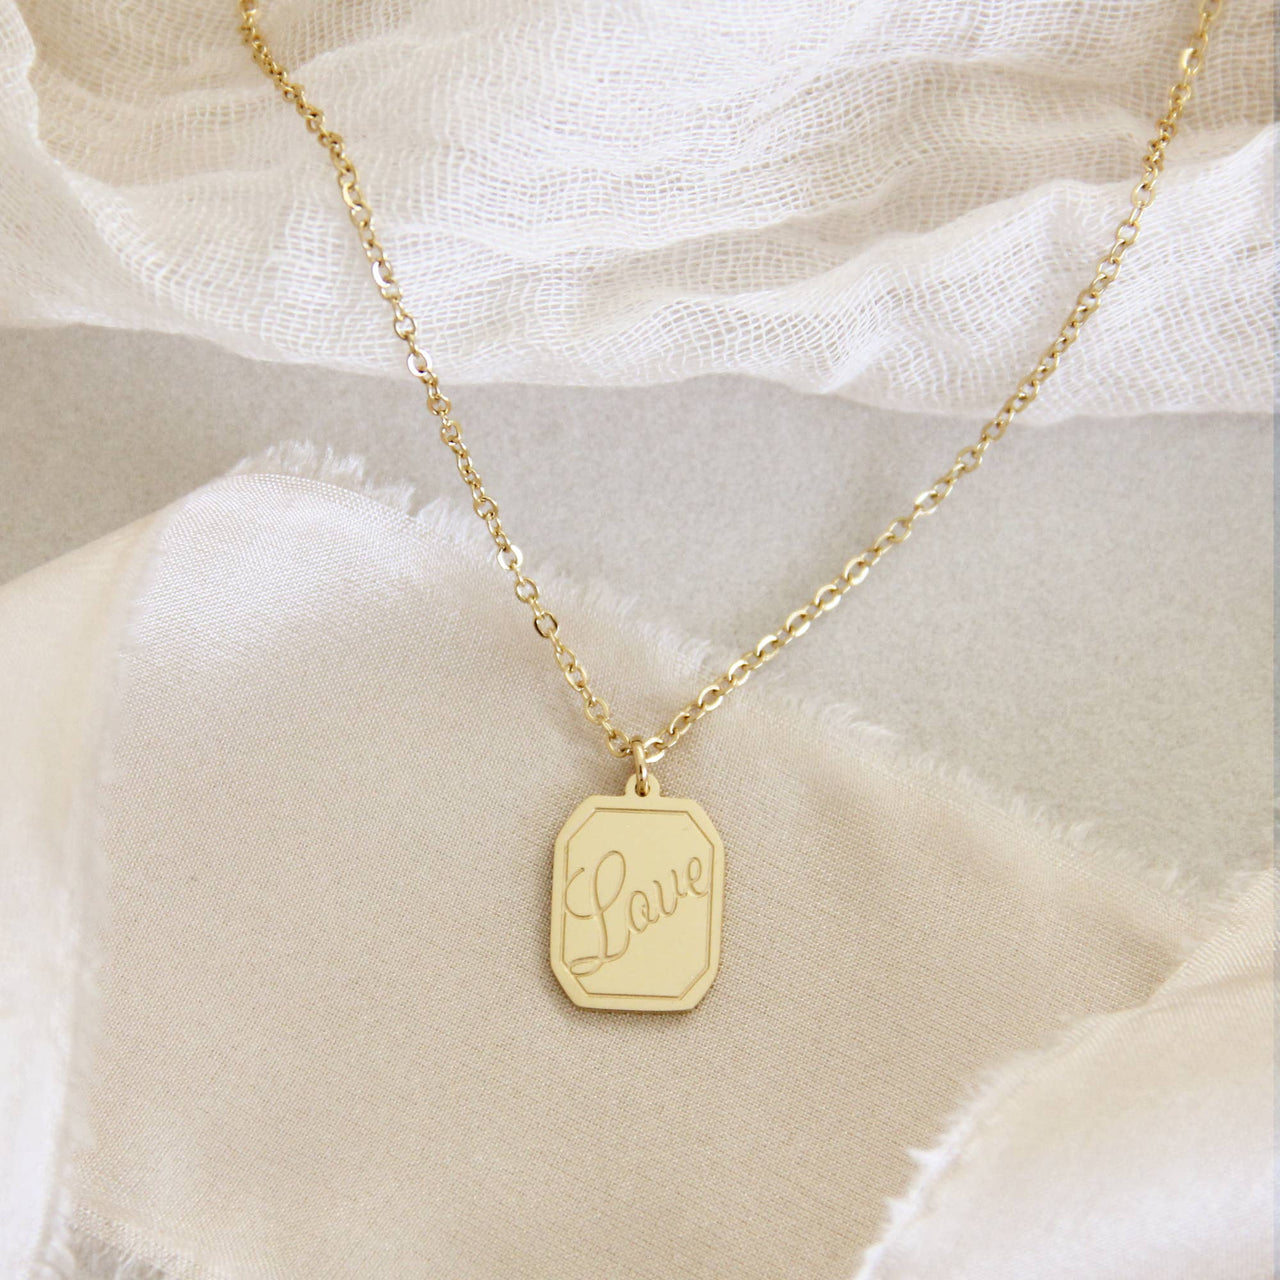 Love Necklace, John 3:16: Yellow Gold